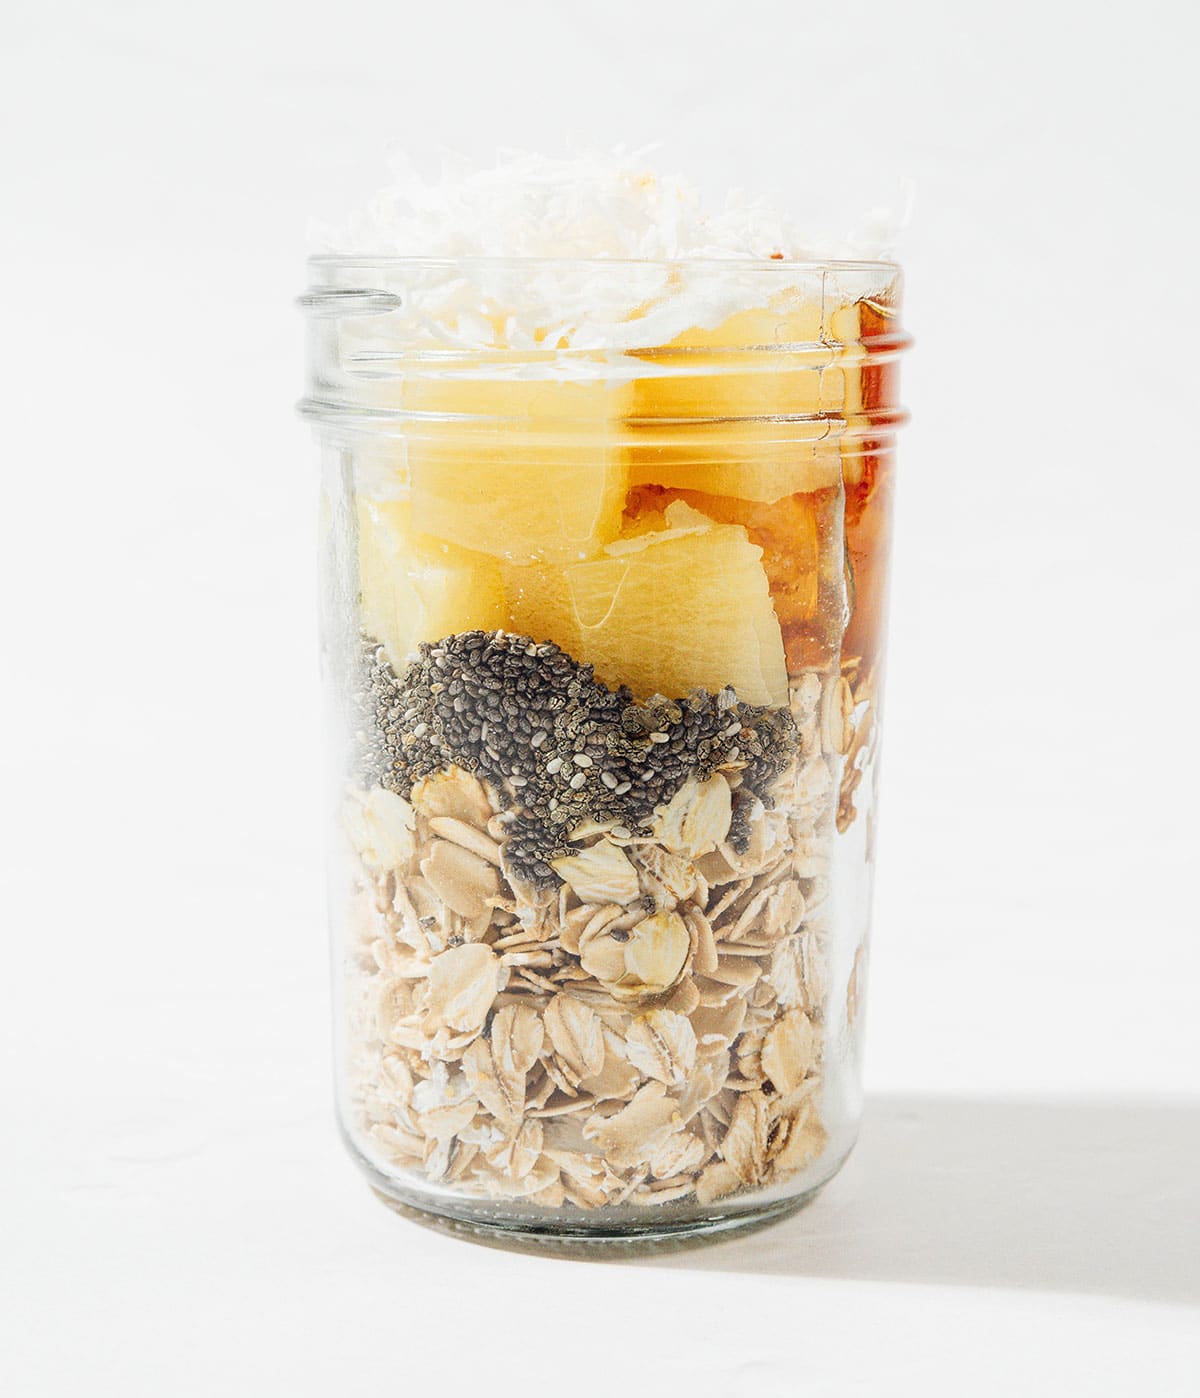 Ingredients for pineapple overnight oats in a jar.